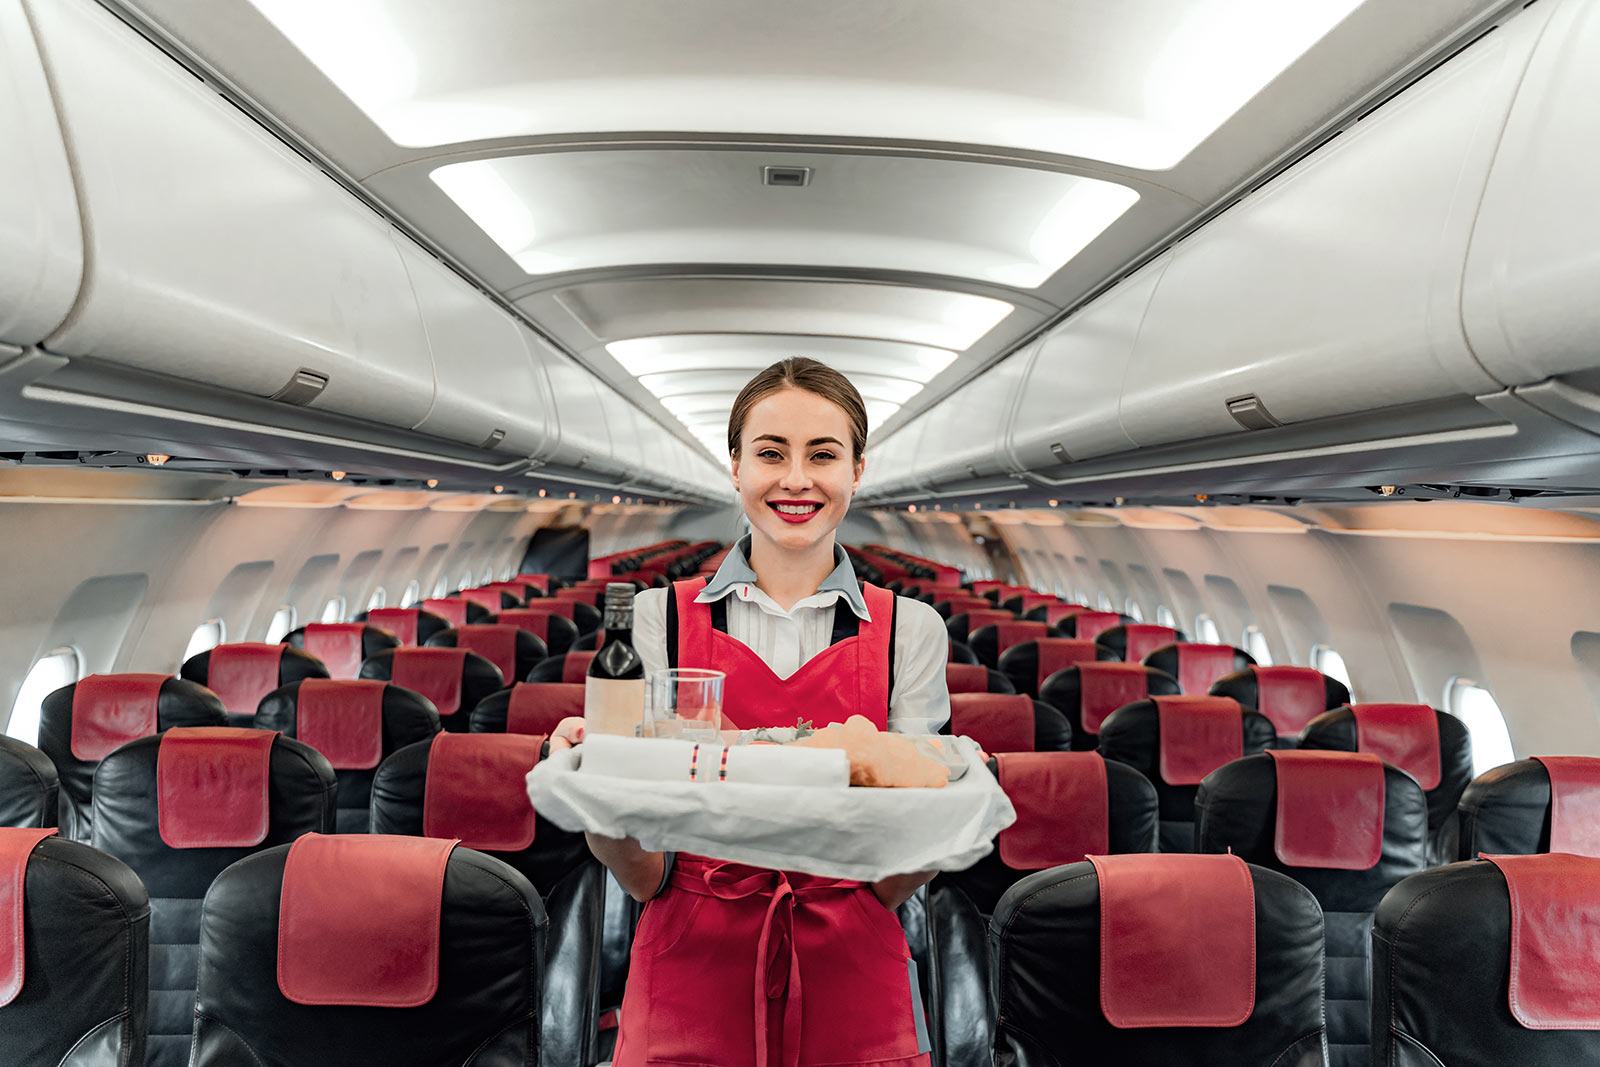 Flight stewardess holding tray of food and drink in passenger cabin of plane. How to survive long haul flights